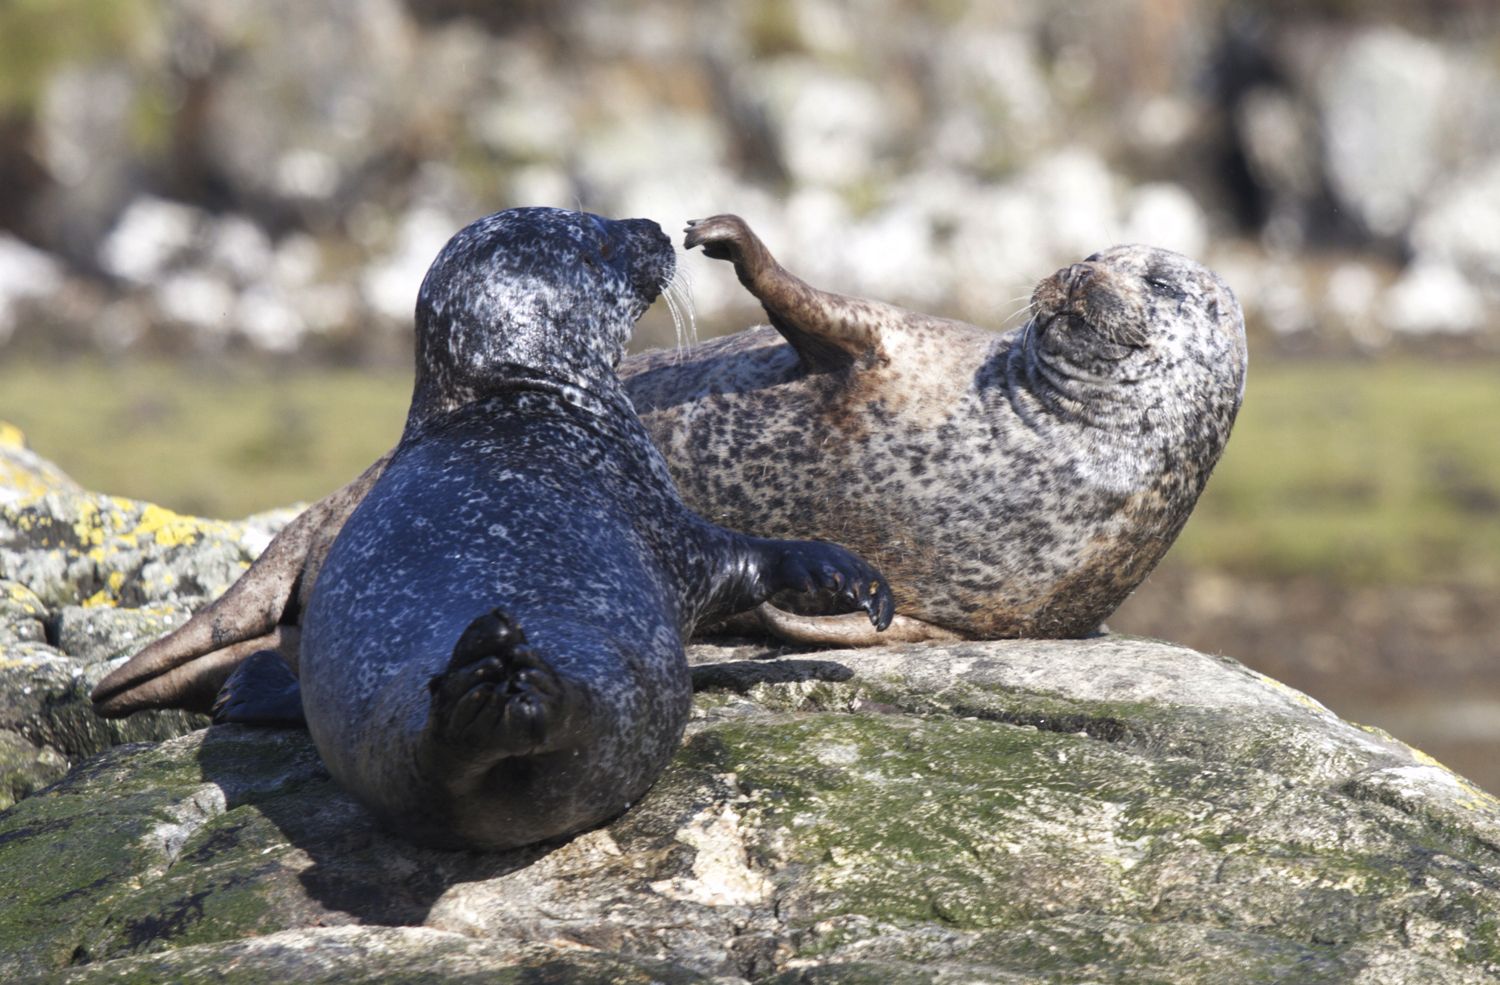 Two harbour seals sitting on a rock. The seals are facing each other and one seal has its flipper raised.